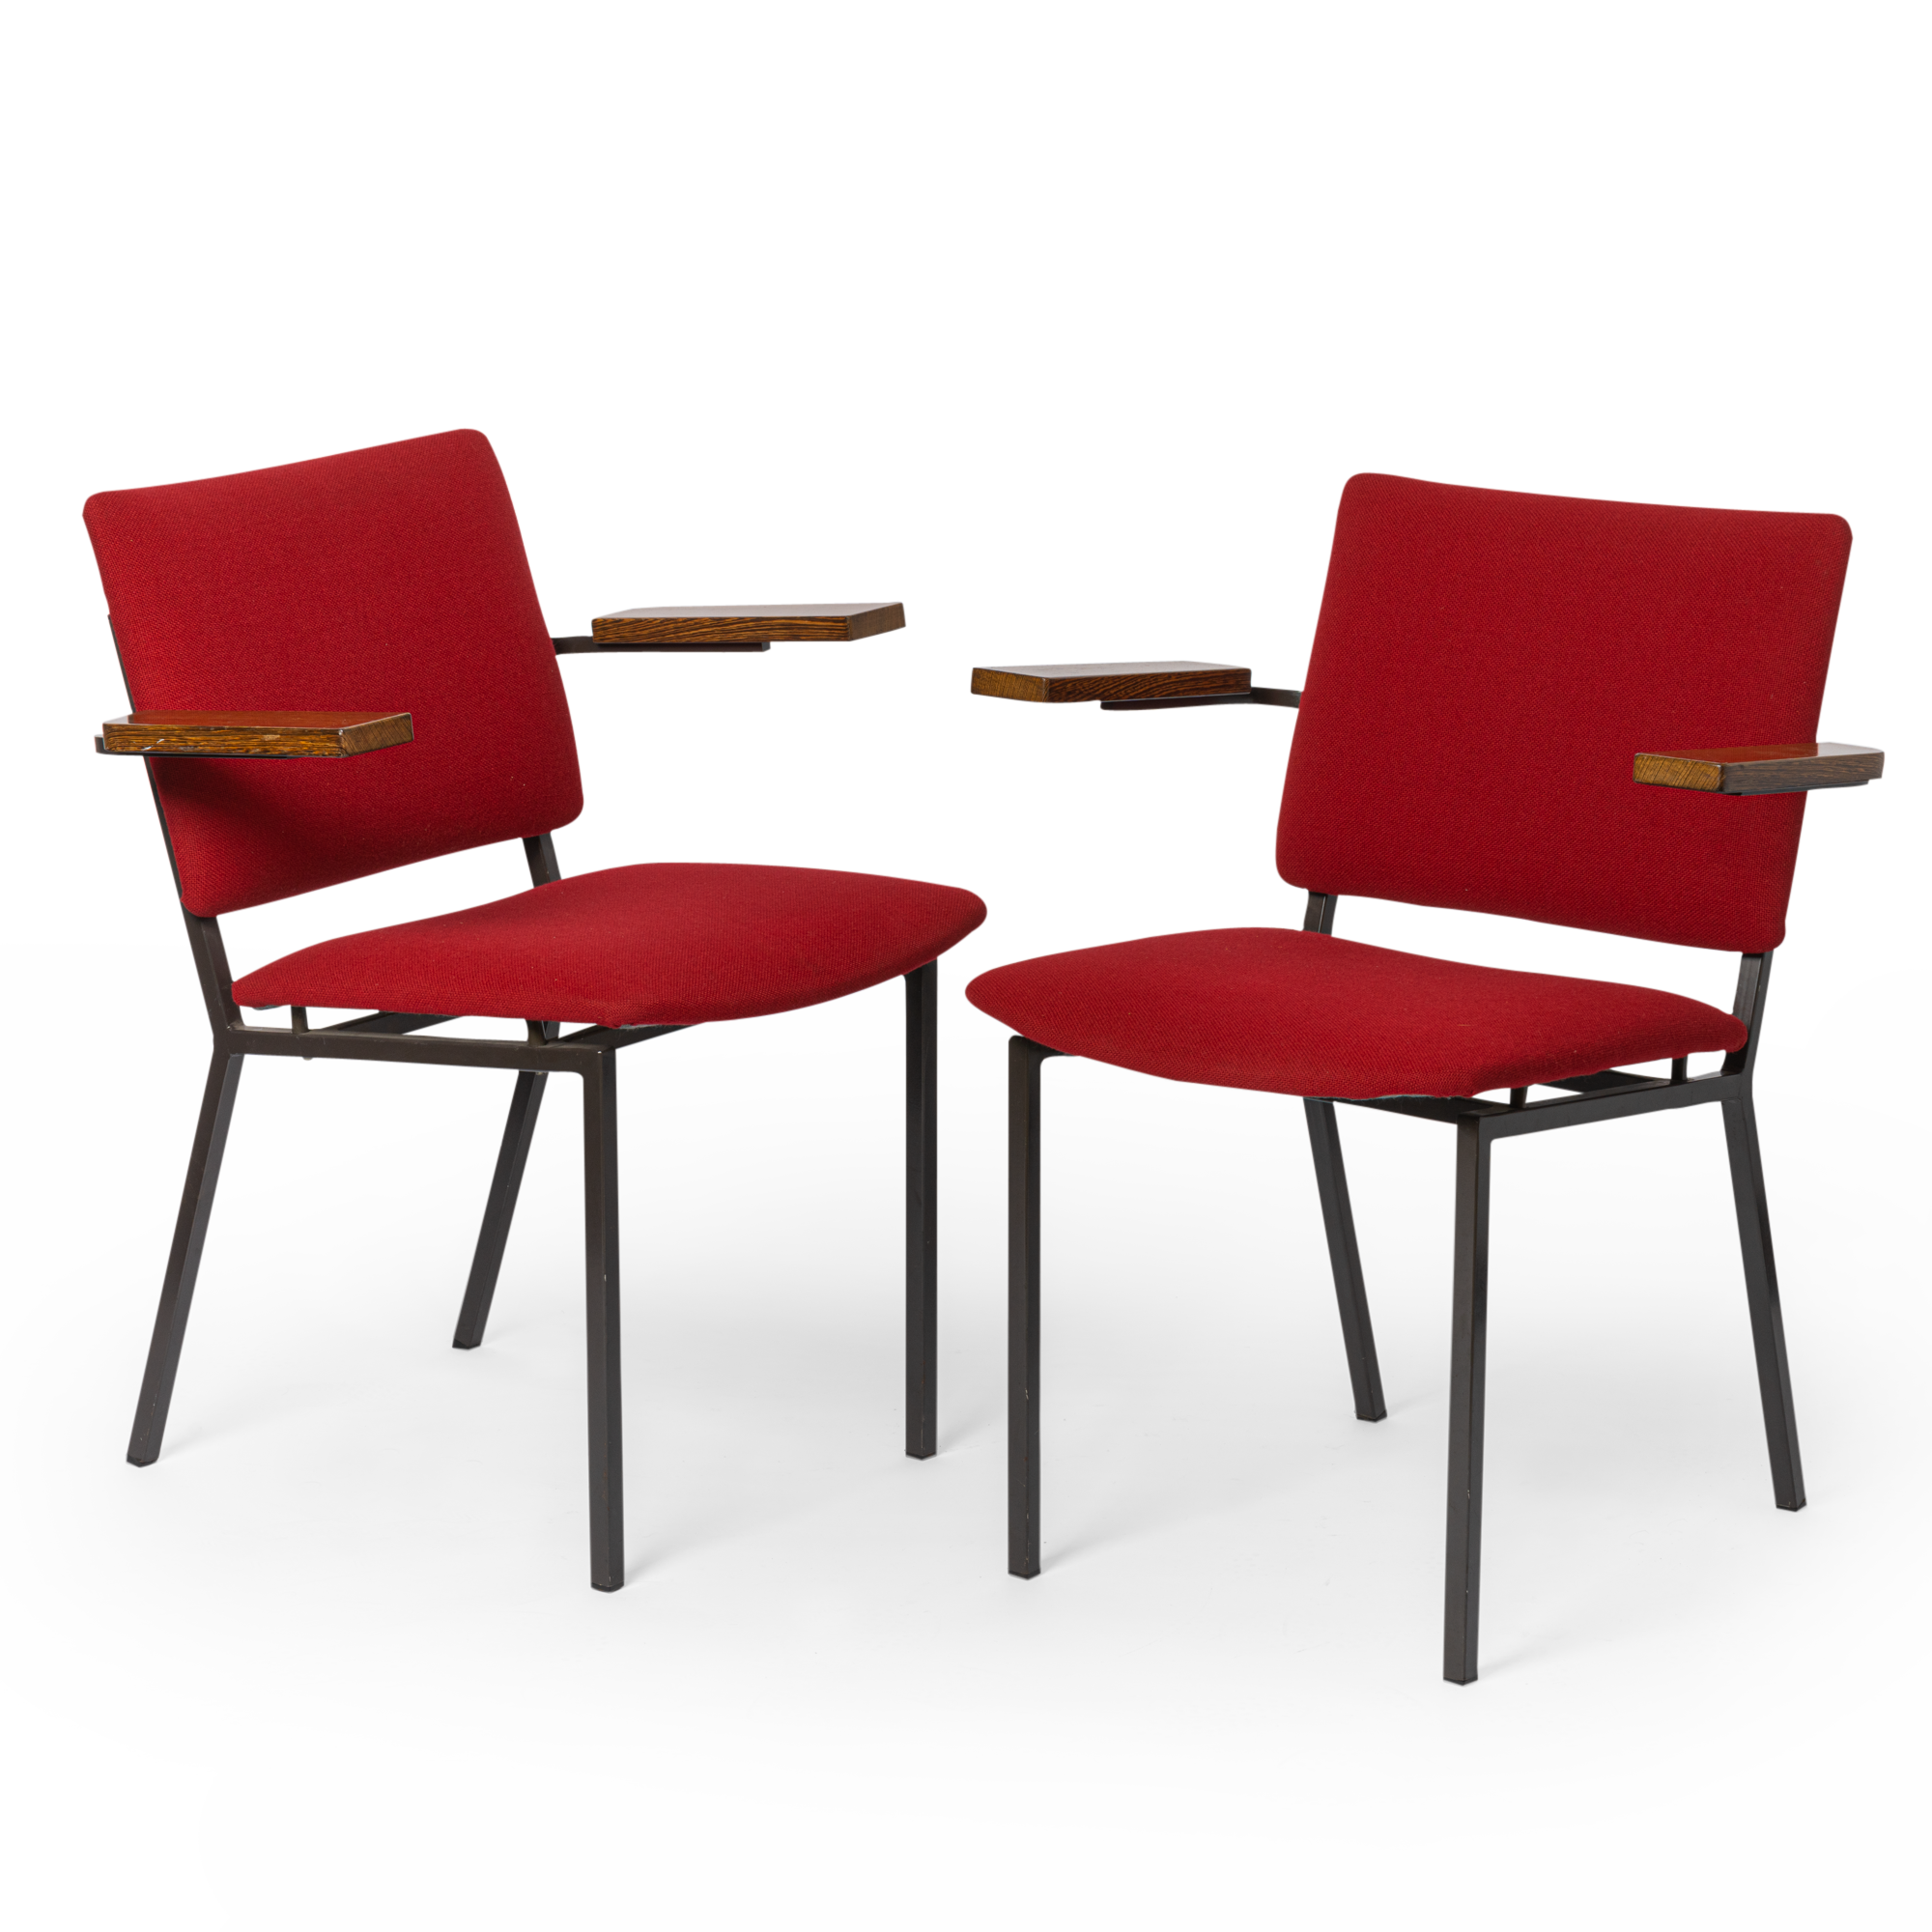 TWO VERY NICE GISPEN KEMBO CHAIRS (GERRIT VEENENDAAL), 1960S